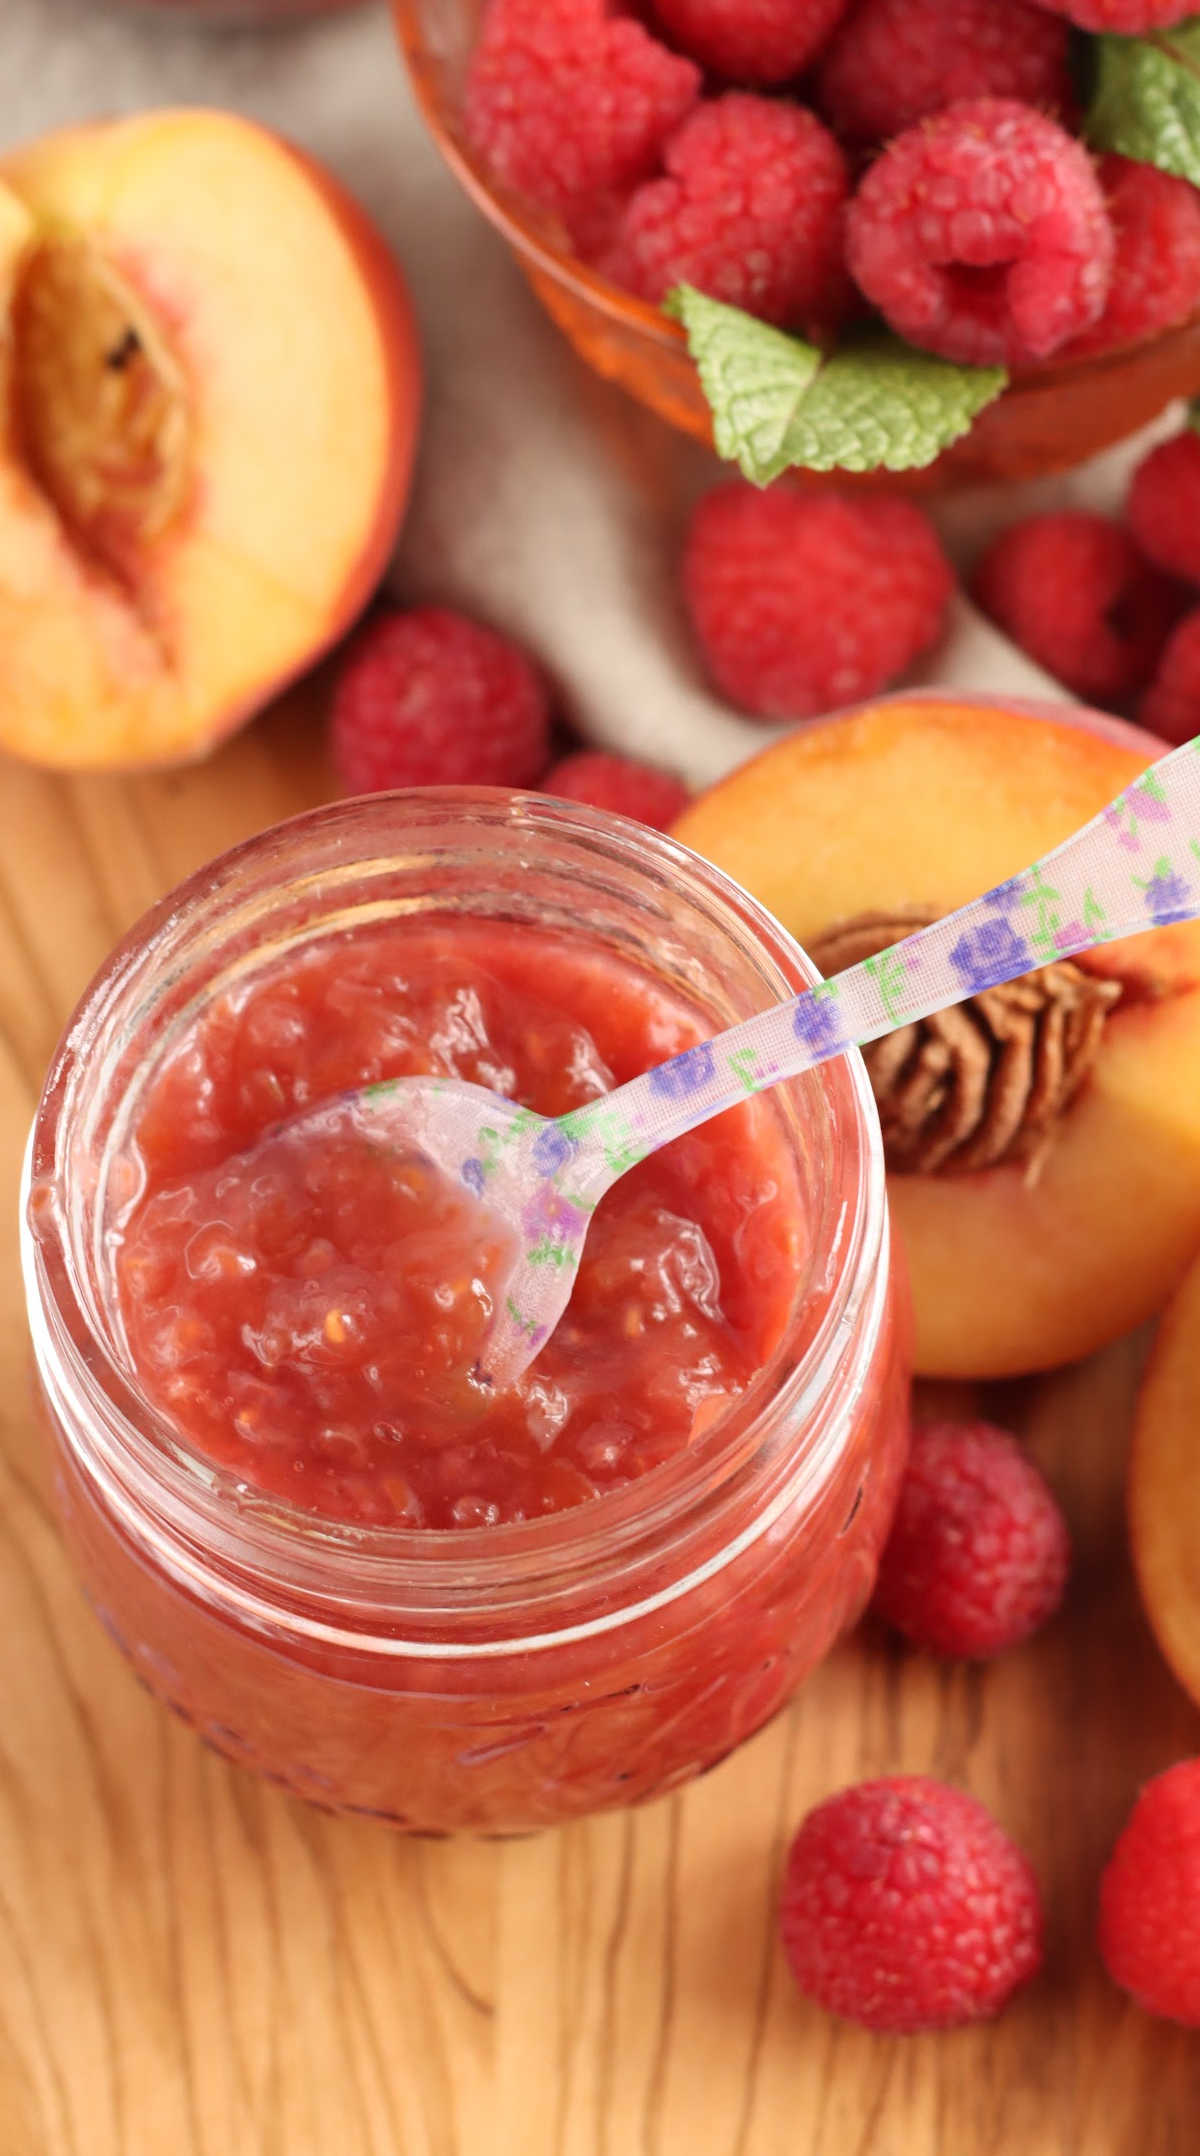 Close up of glass jar with peach raspberry jam on wooden cutting board, fresh fruit in background.